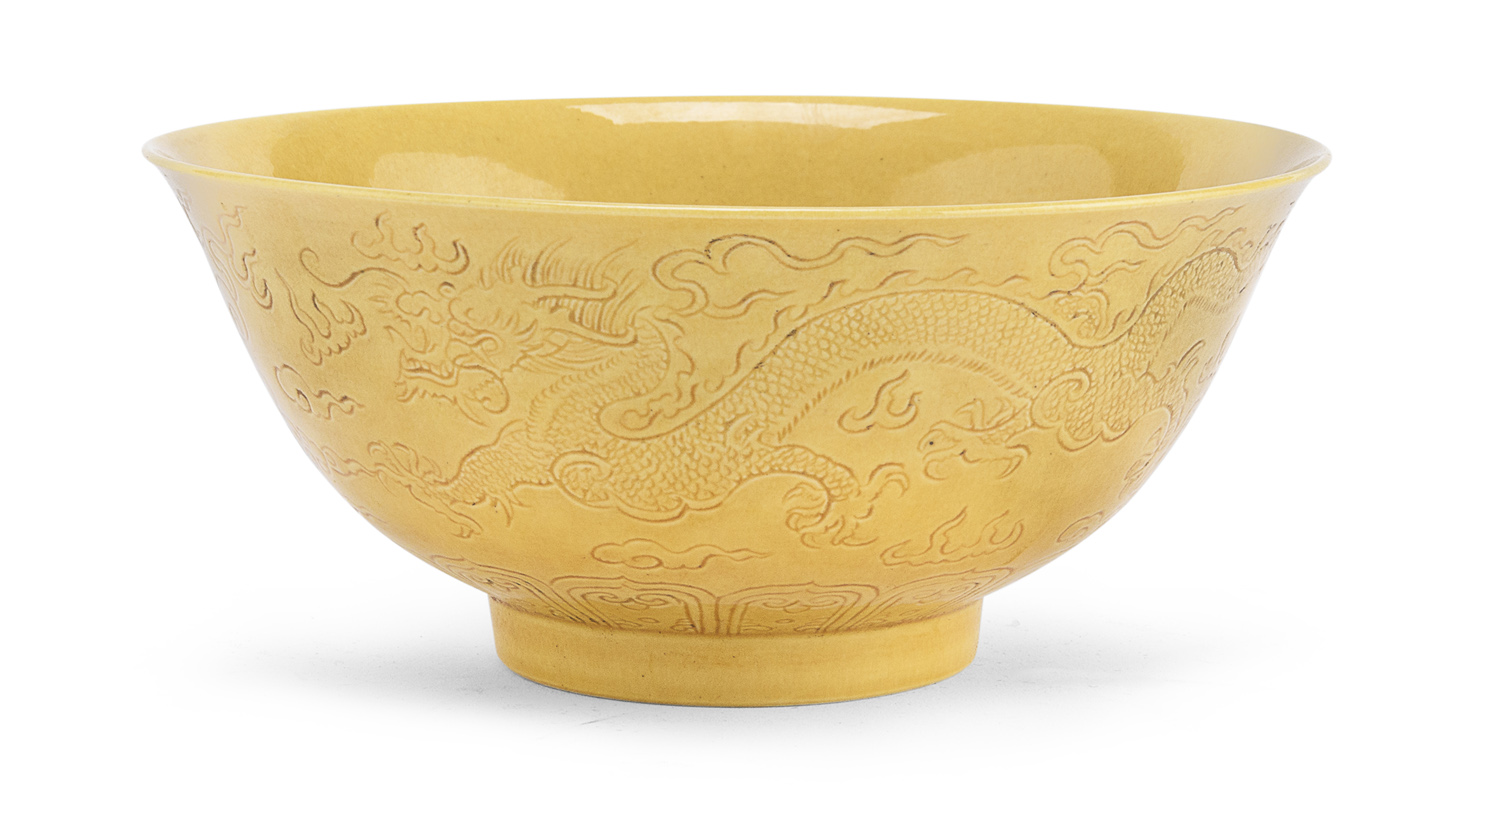 A CHINESE YELLOW PORCELAIN BOWL 20TH CENTURY.